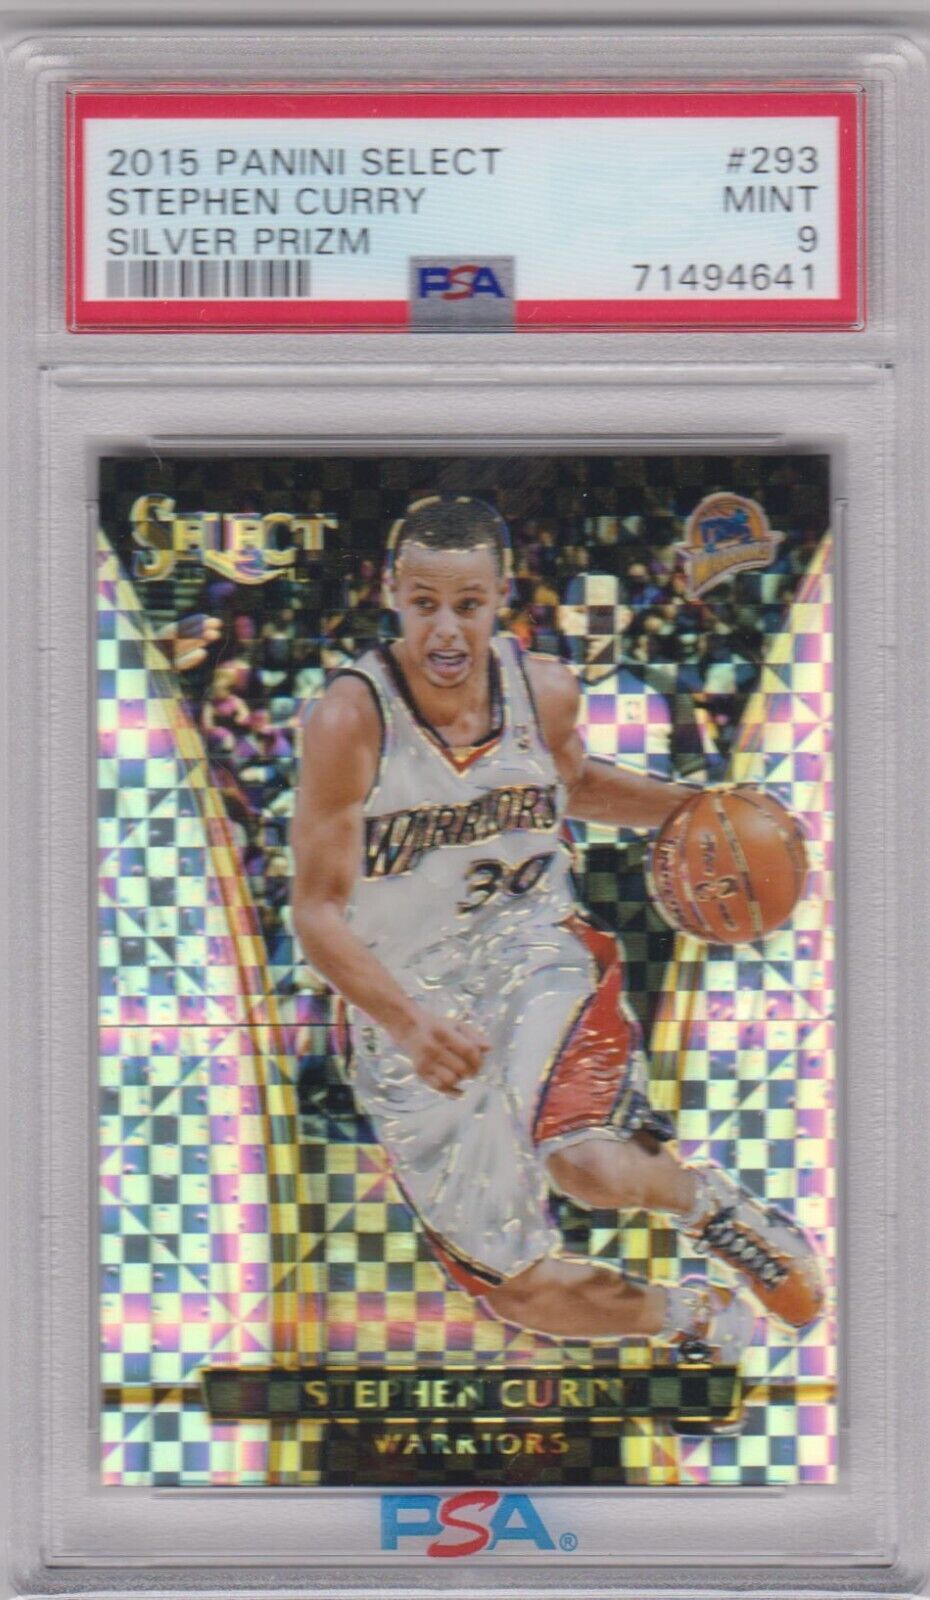 STEPHEN STEPH CURRY 2015-16 Panini Select Courtside Silver Prizm #293 PSA 9 MINT